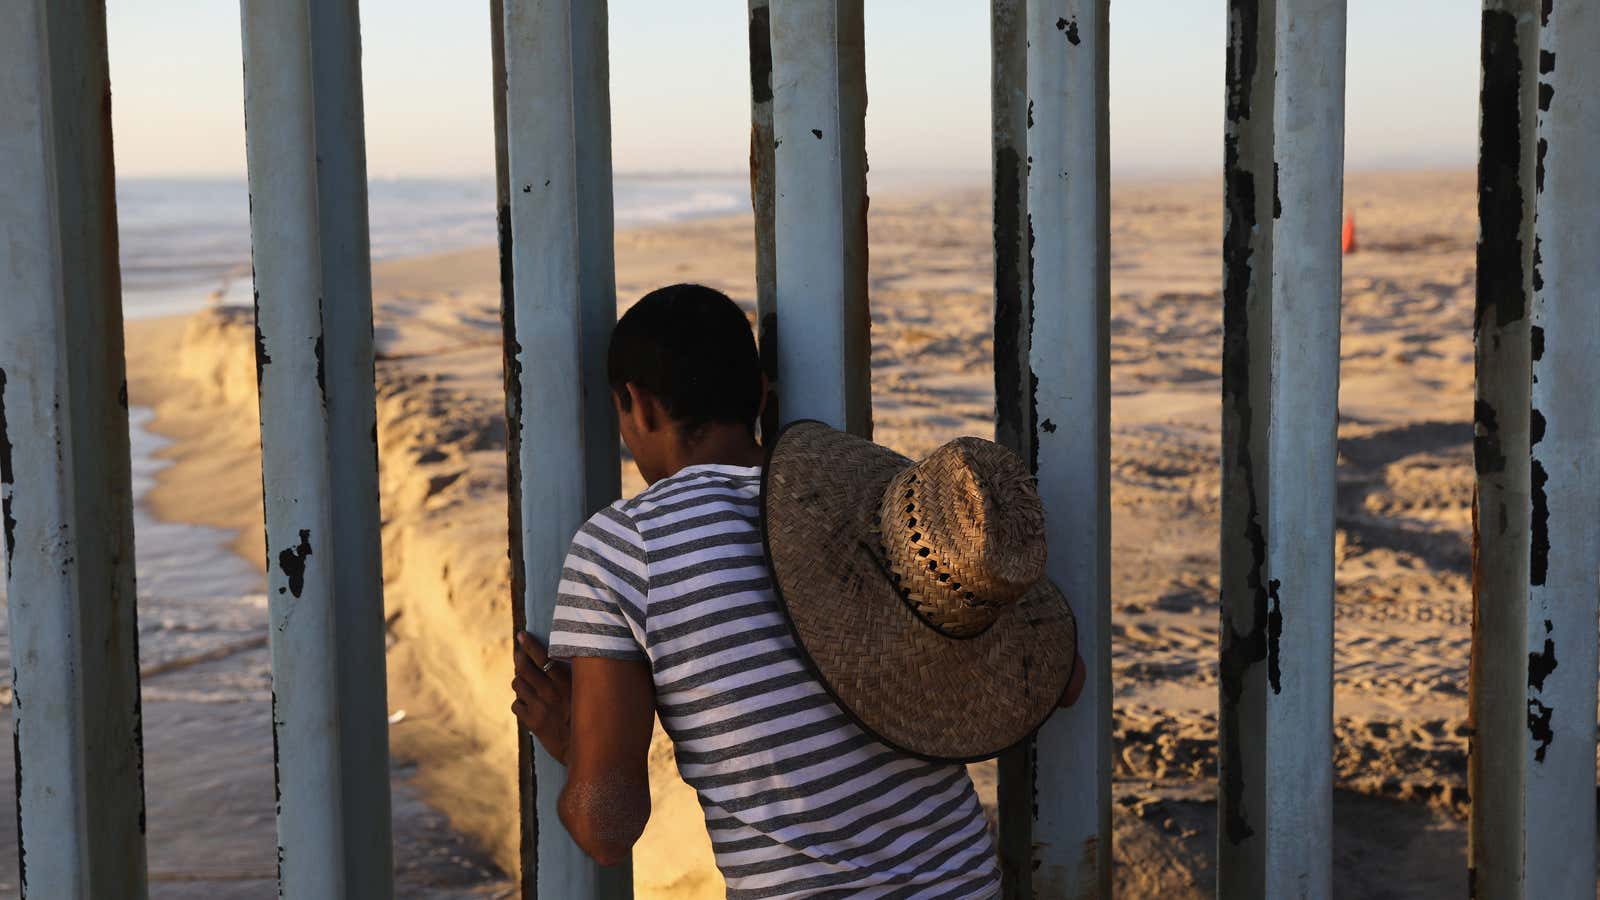 A man looks through the U.S.-Mexico border fence into the United States on September 25, 2016 in Tijuana, Mexico.